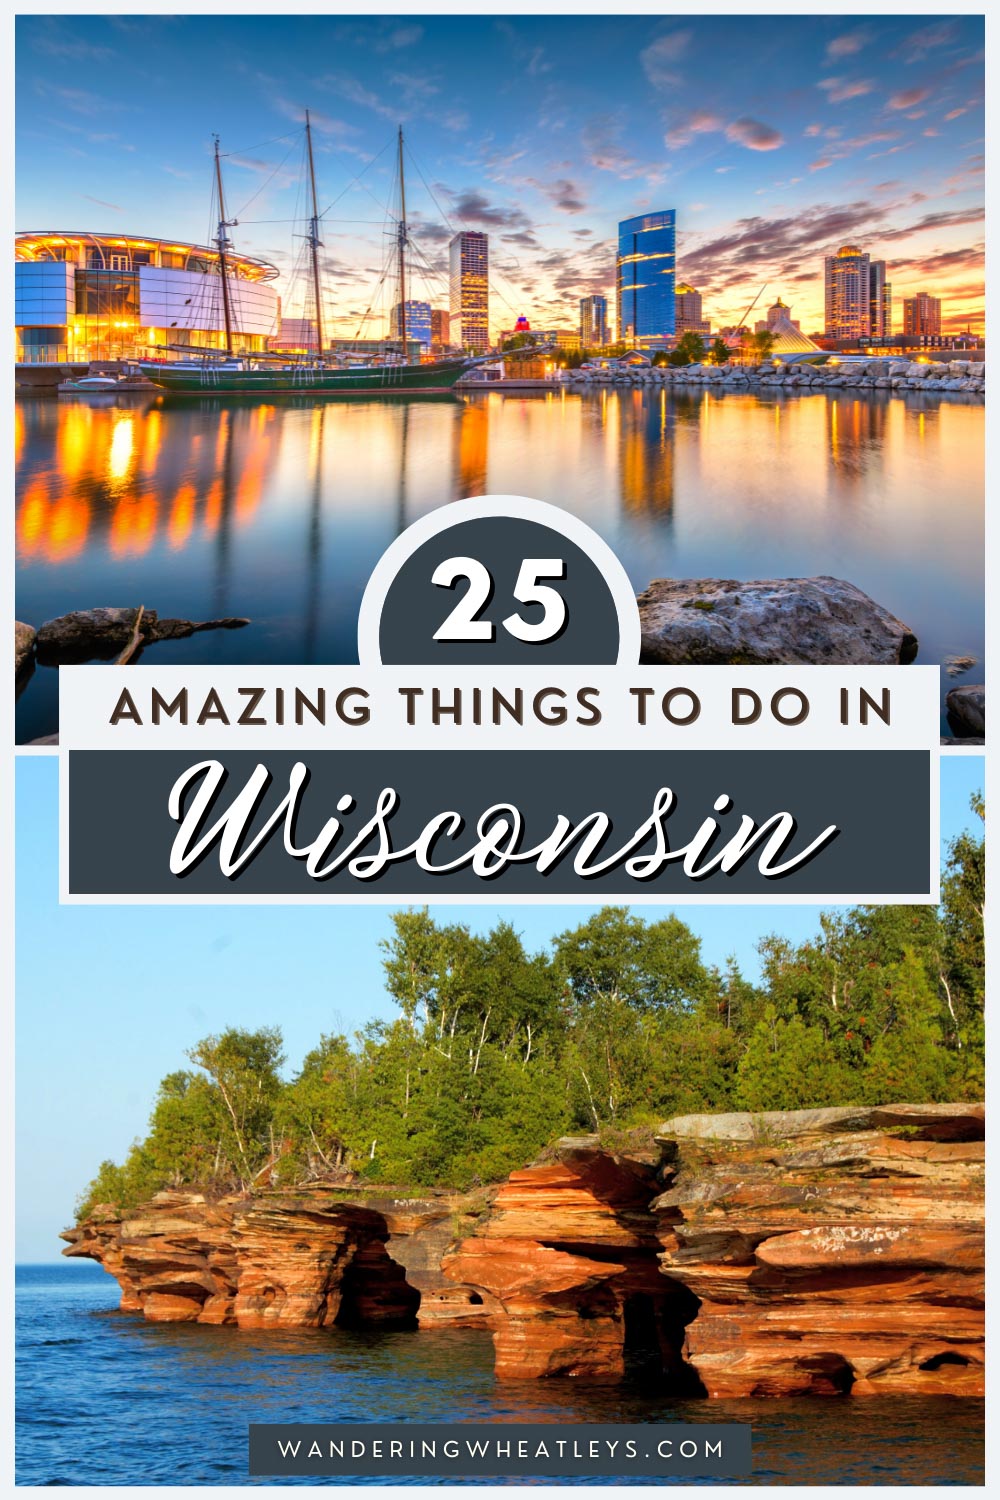 The Best Things to do in Wisconsin